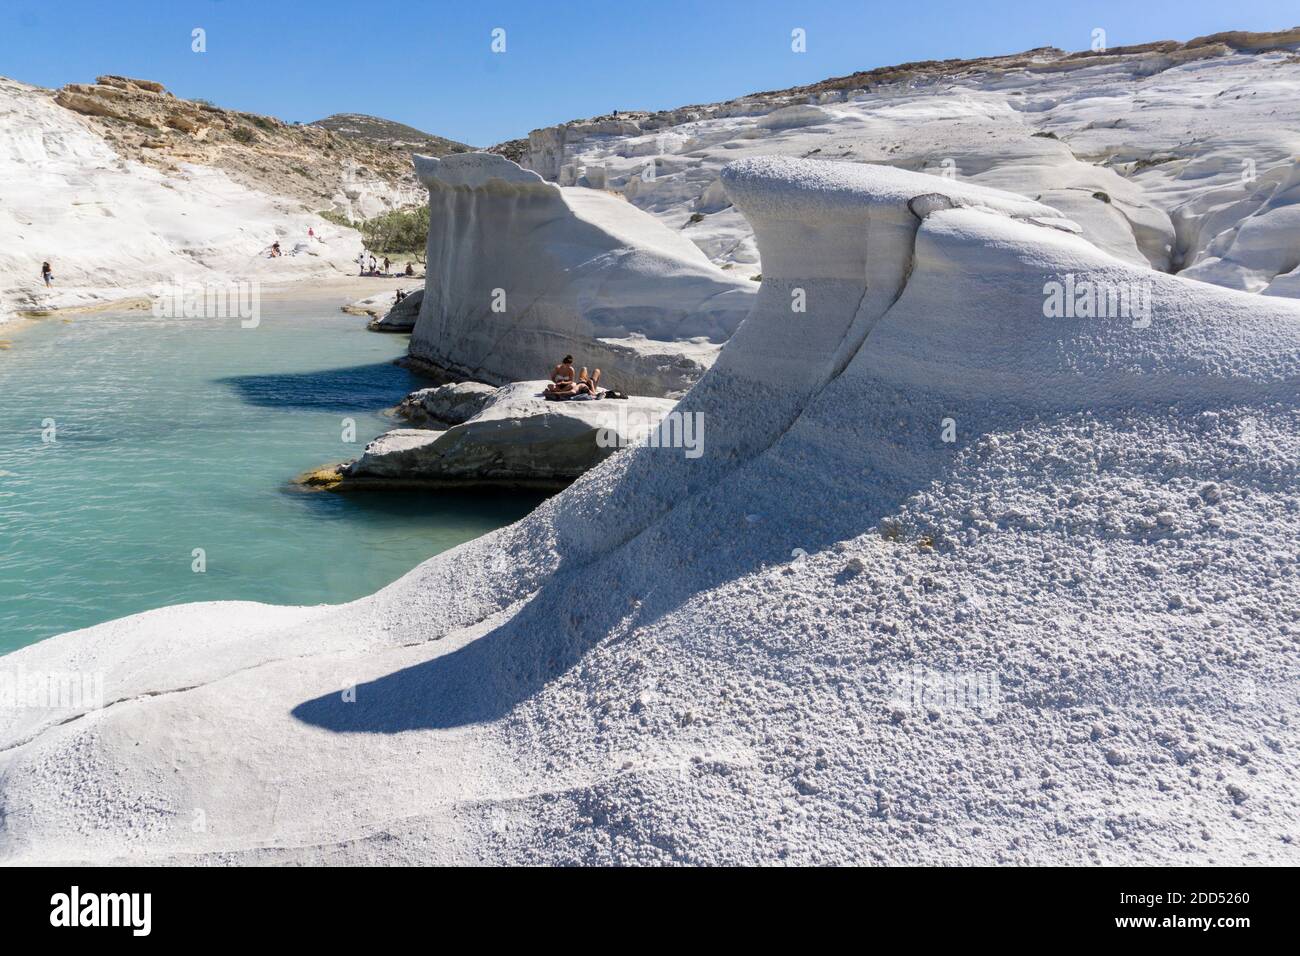 Sarakiniko is a beach on Milos Island, Greece, situated on the north shore of the island. Waves driven by north winds shape the greyish-white volcanic Stock Photo